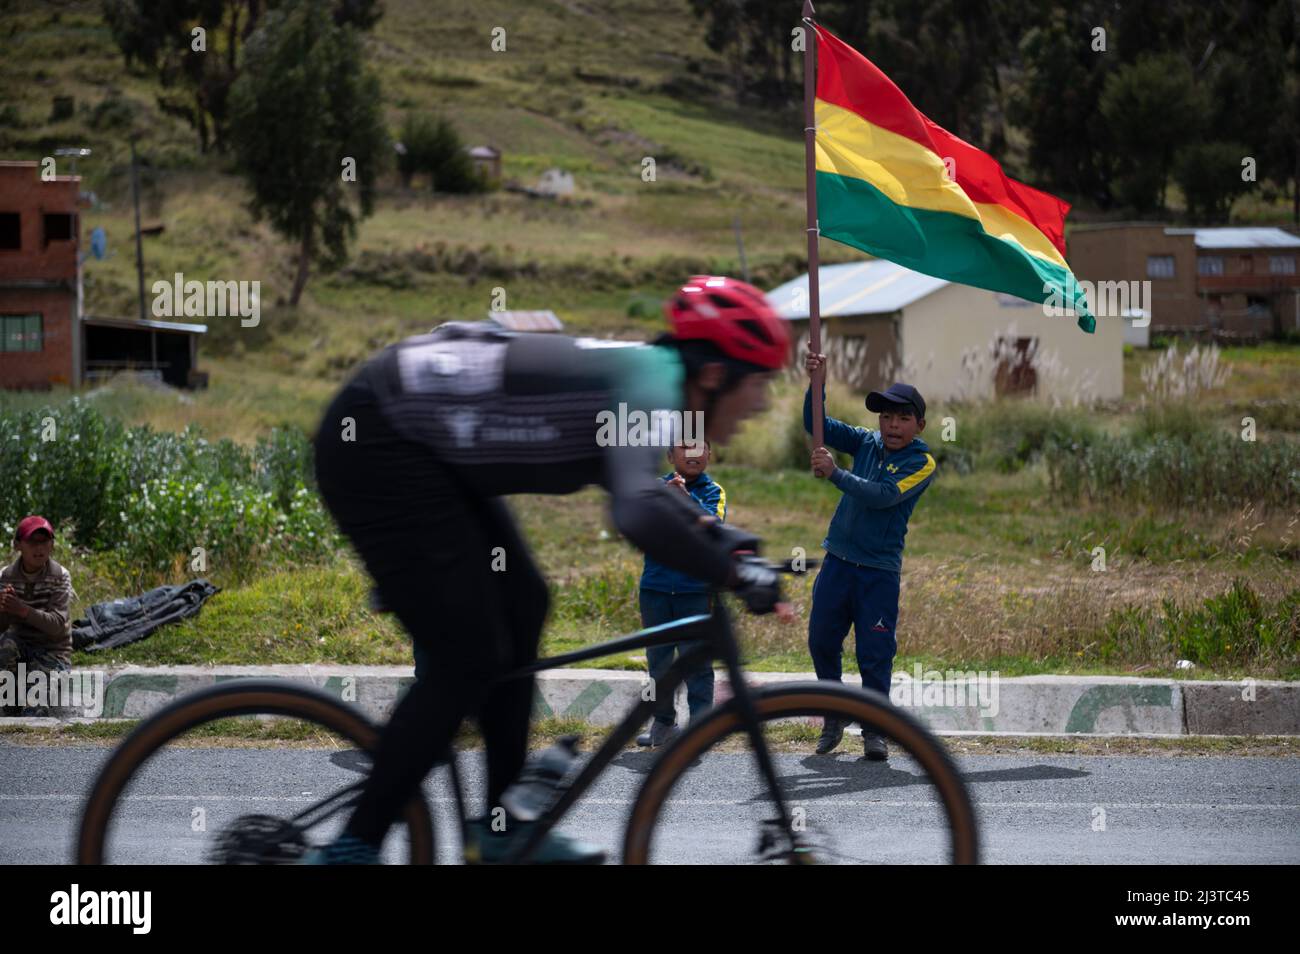 Jankho Amaya, Bolivia. 09th Apr, 2022. Children holding a Bolivian flag cheer on a cyclist during a bike race. The 'Poncho rojo' (red poncho) race, named after the typical garment worn by local authorities, attracts both professional and amateur participants and runs along the shores of Lake Titicaca at altitudes ranging from 3800 to 4000 meters above sea level. This year, more than 450 cyclists of all ages have registered for the event, which is either 52 or 97 kilometers long. Credit: Radoslaw Czajkowski/dpa/Alamy Live News Stock Photo